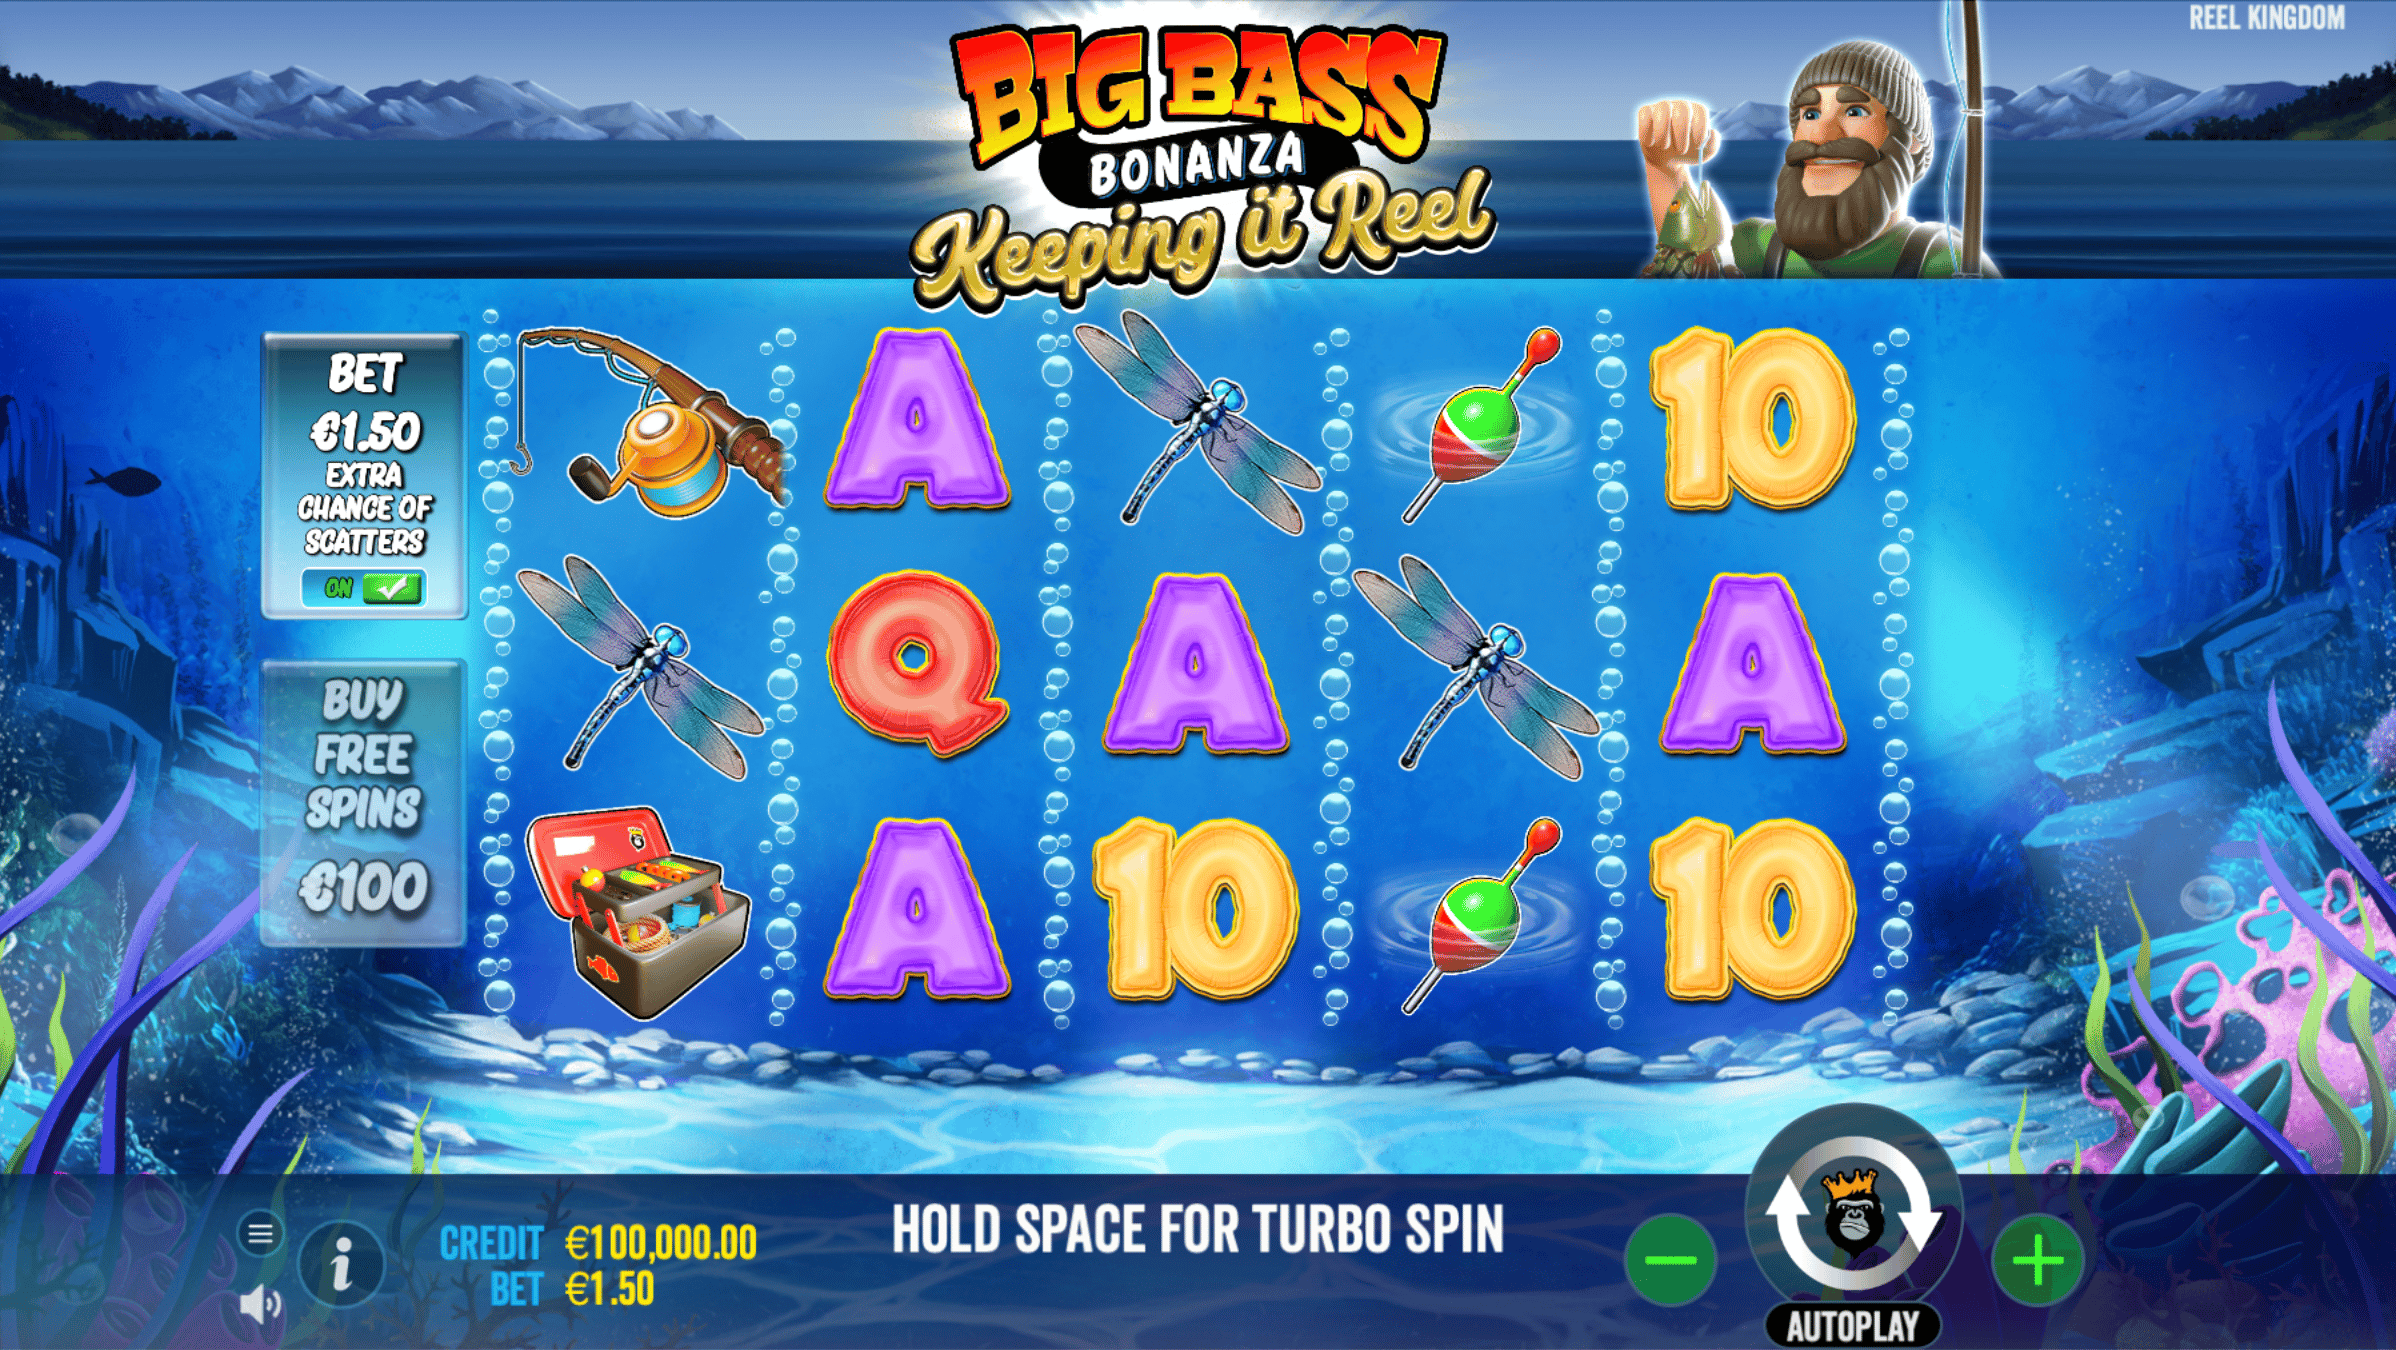 Bet an Additional 50% in Reel Kingdom's Big Bass Keeping it Reel to Increase the Chance of Triggering Free Spins Naturally